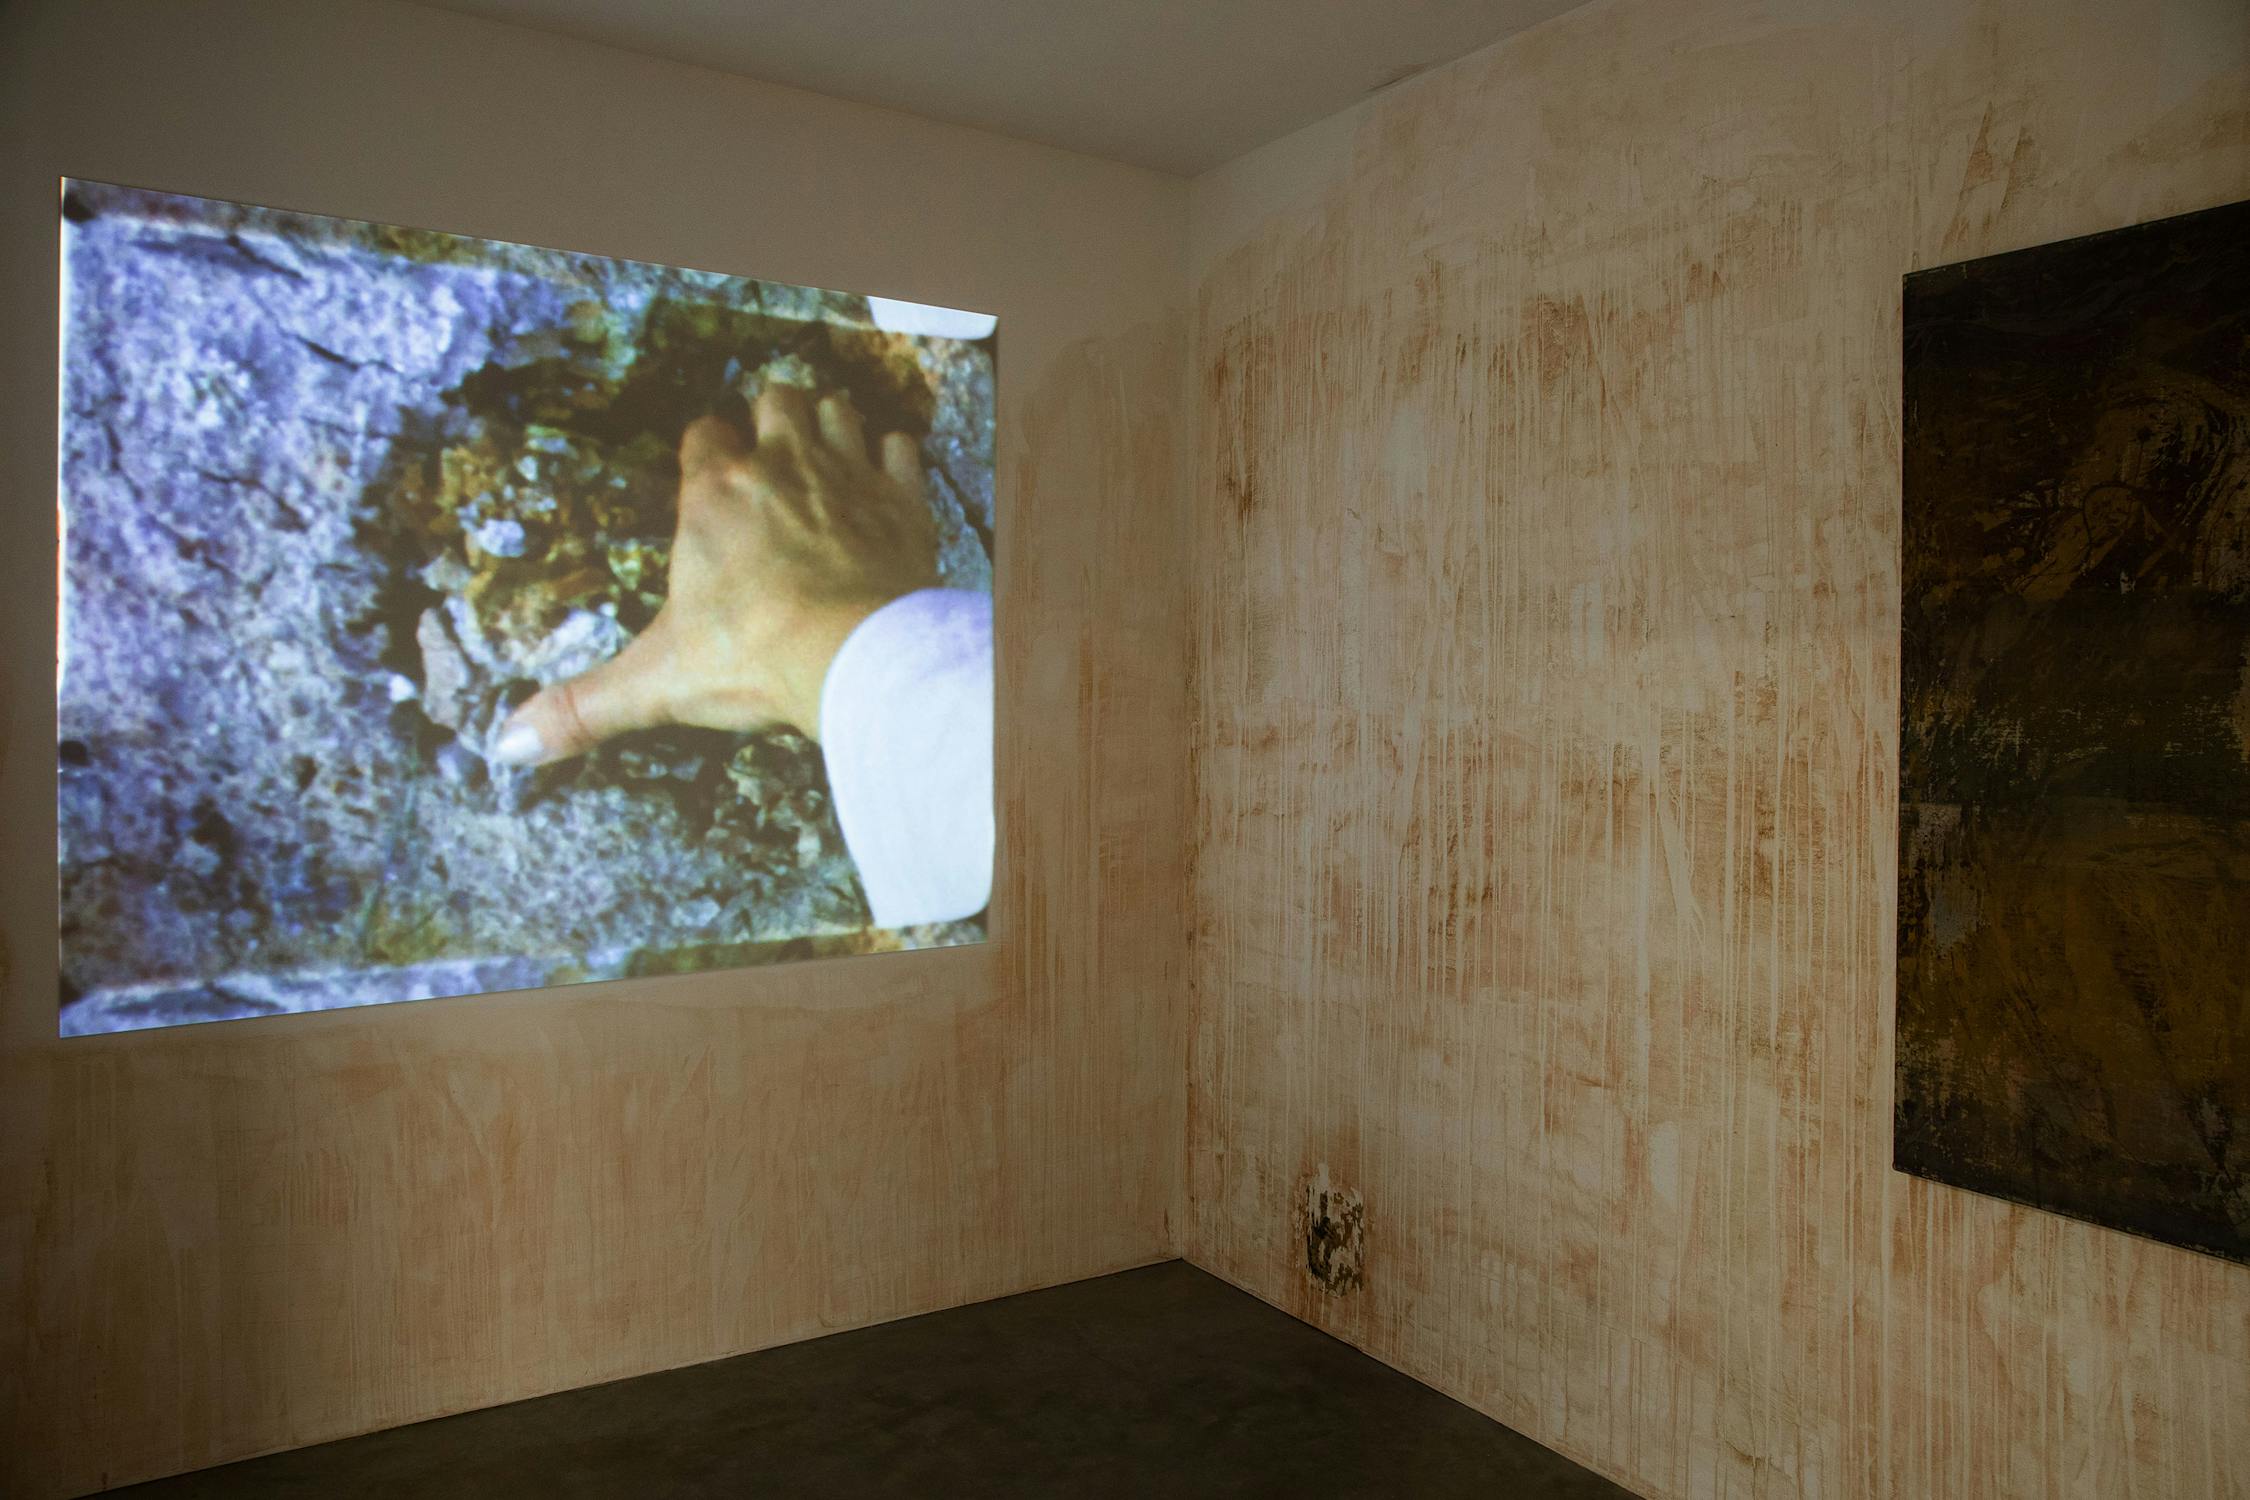 The project studio showing a still from The Friendship Garden film, with a hand reaching into some rocks